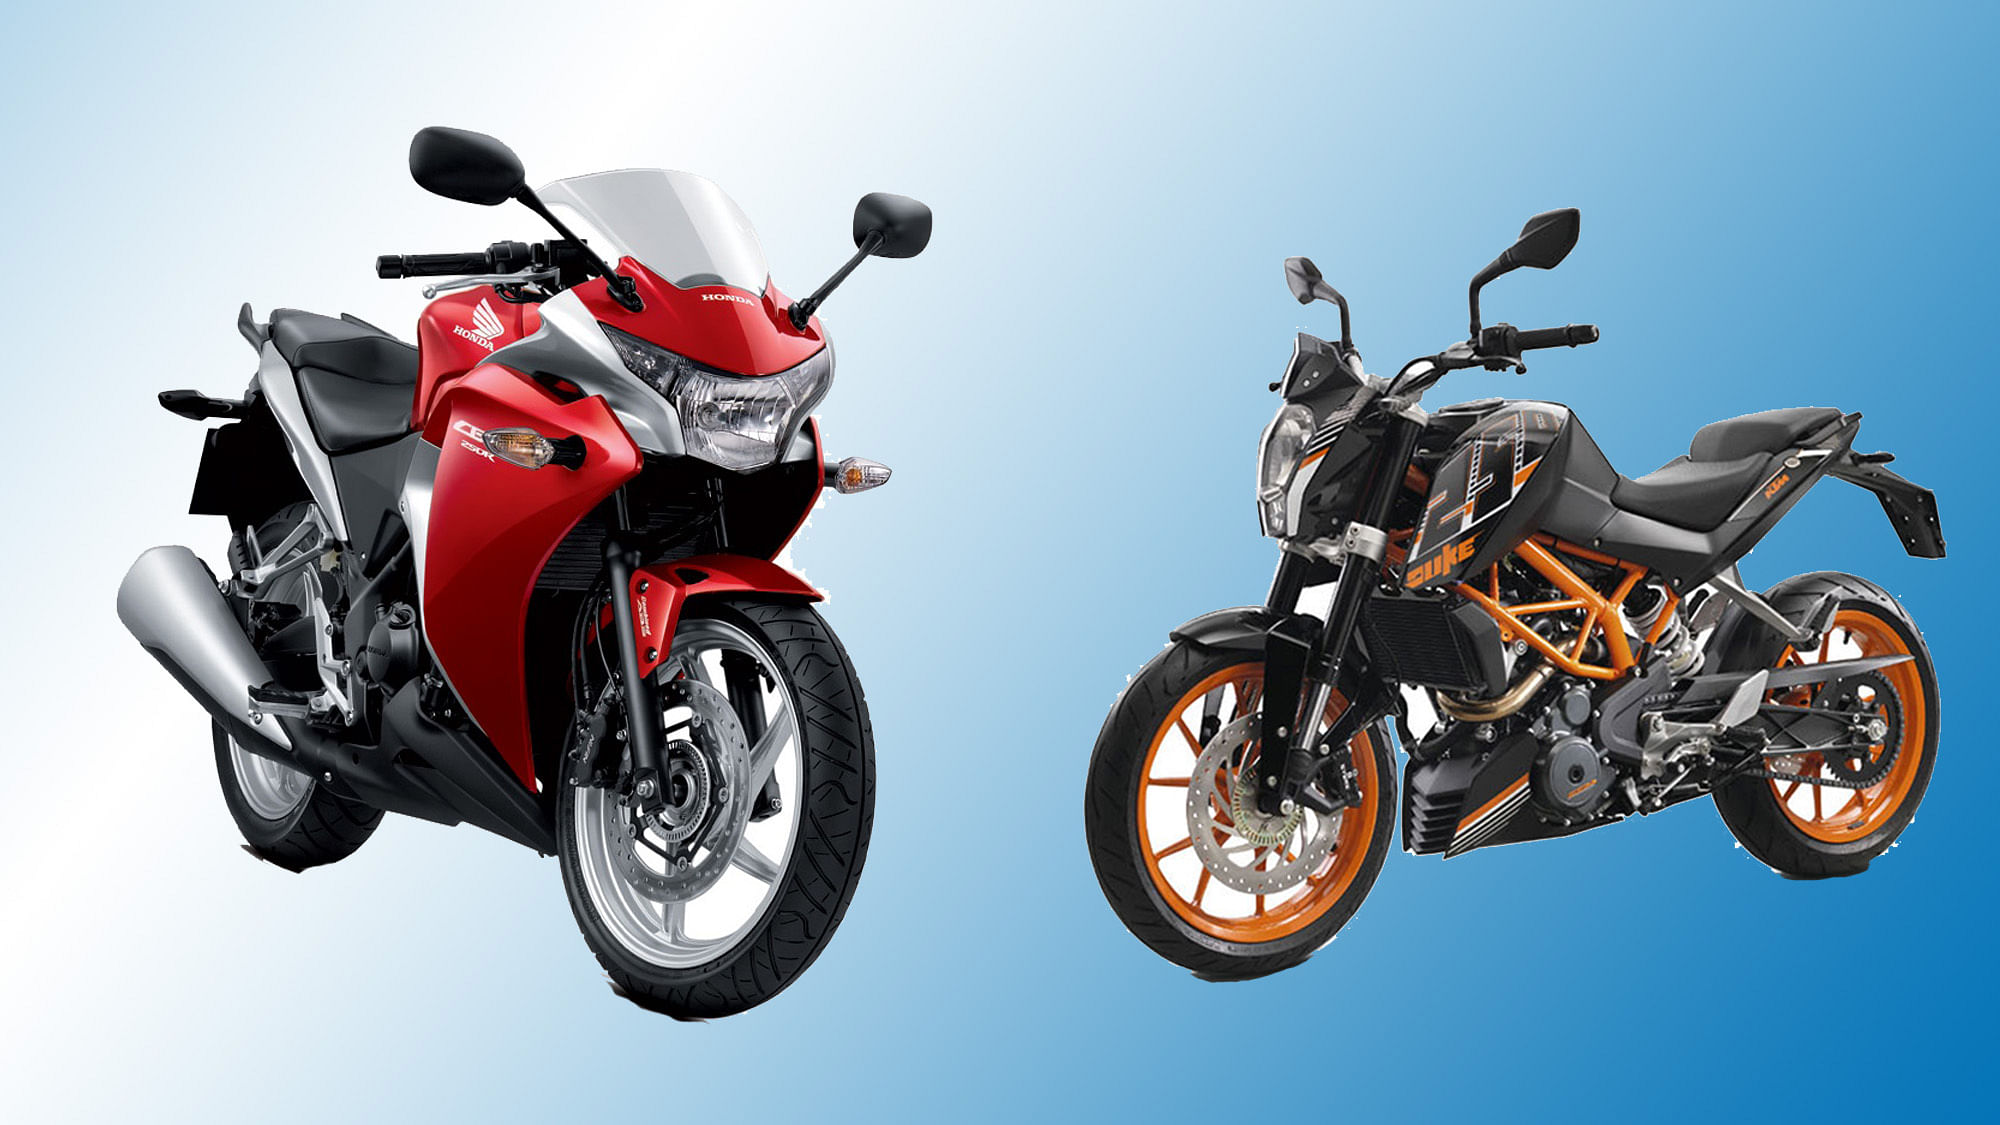 Honda Cbr250r Vs Ktm Duke 250 Which Of These Is Worth Buying